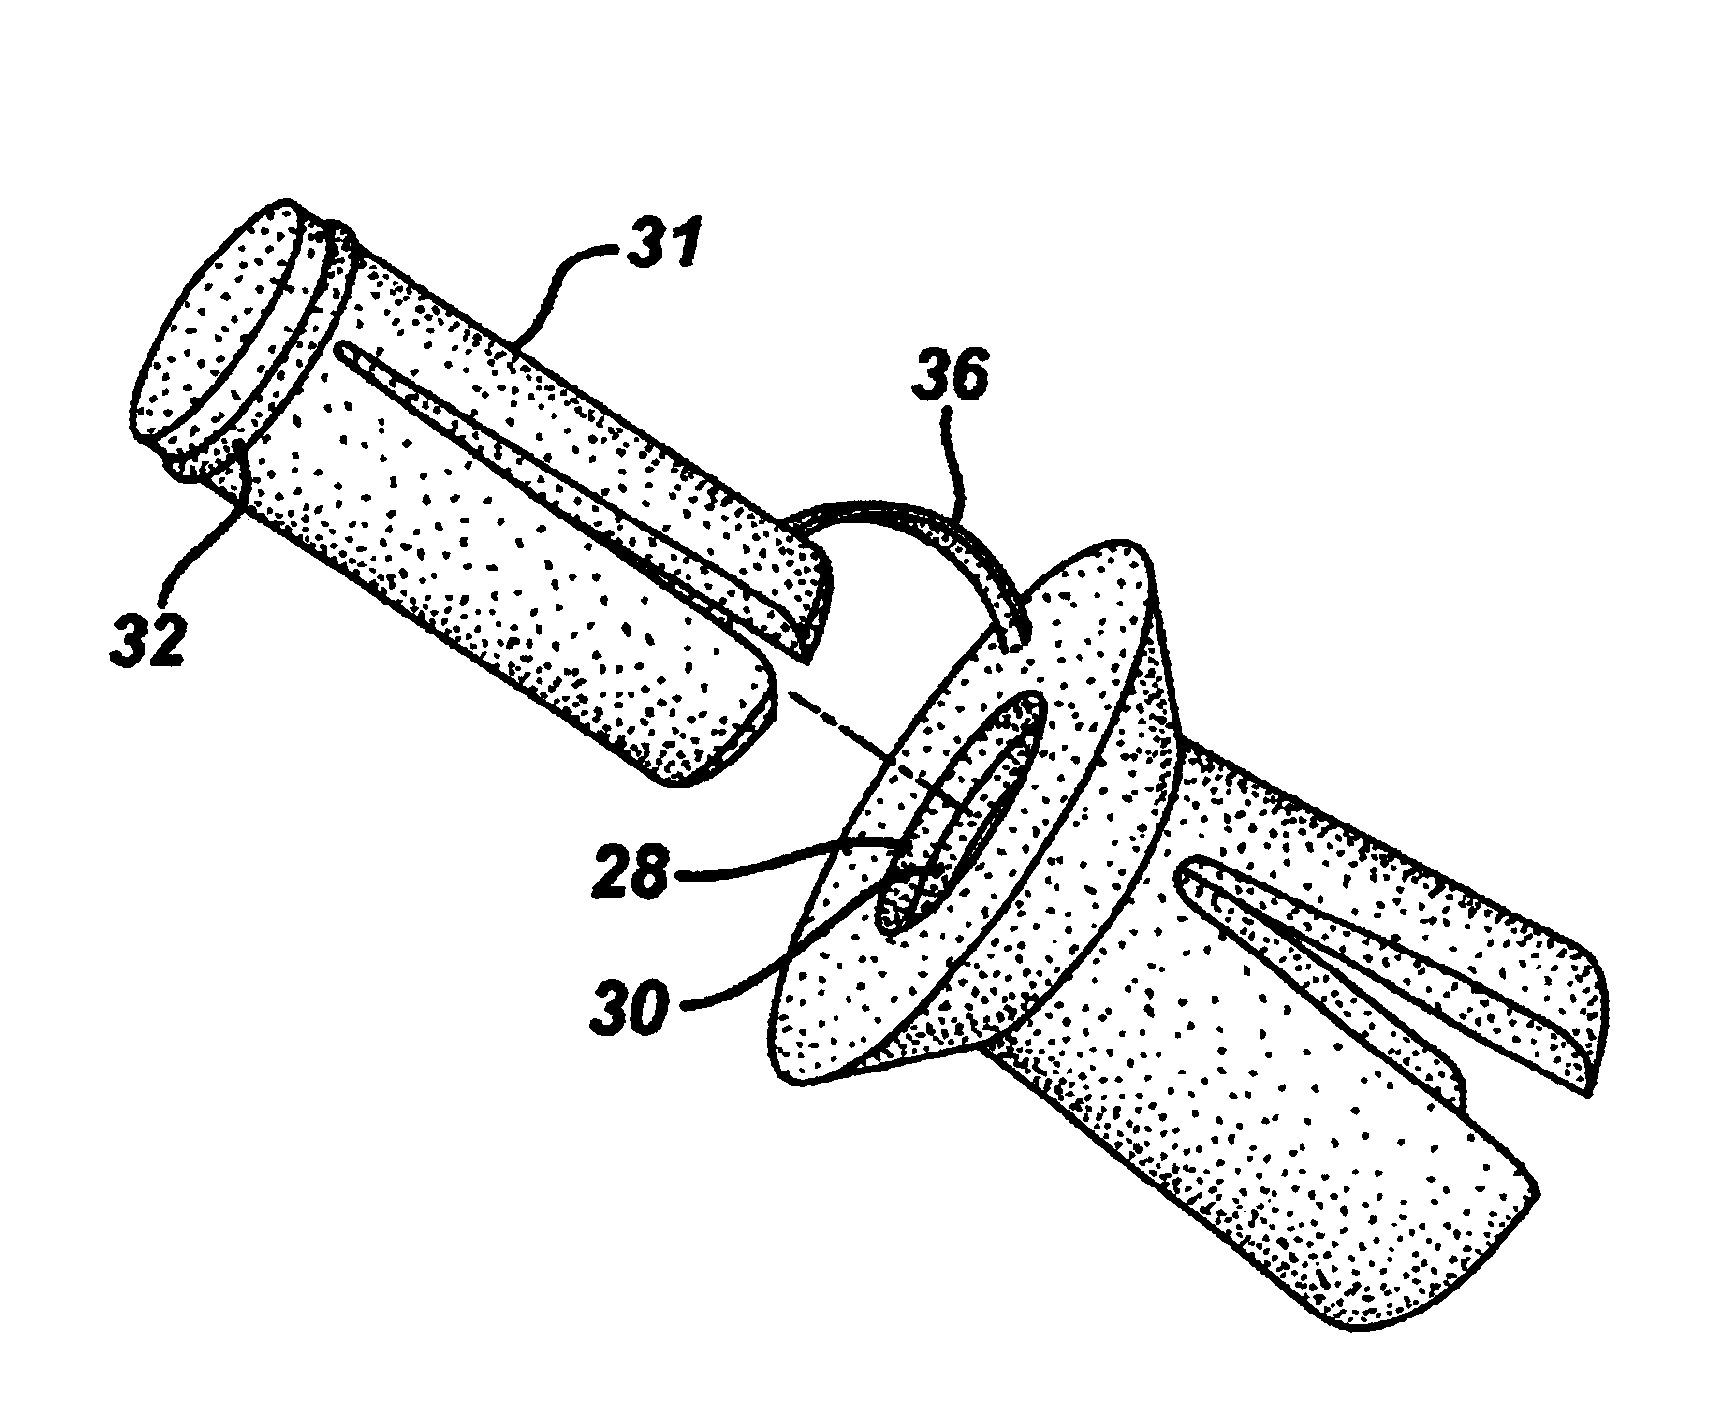 One-piece biocompatible absorbable rivet and pin for use in surgical procedures